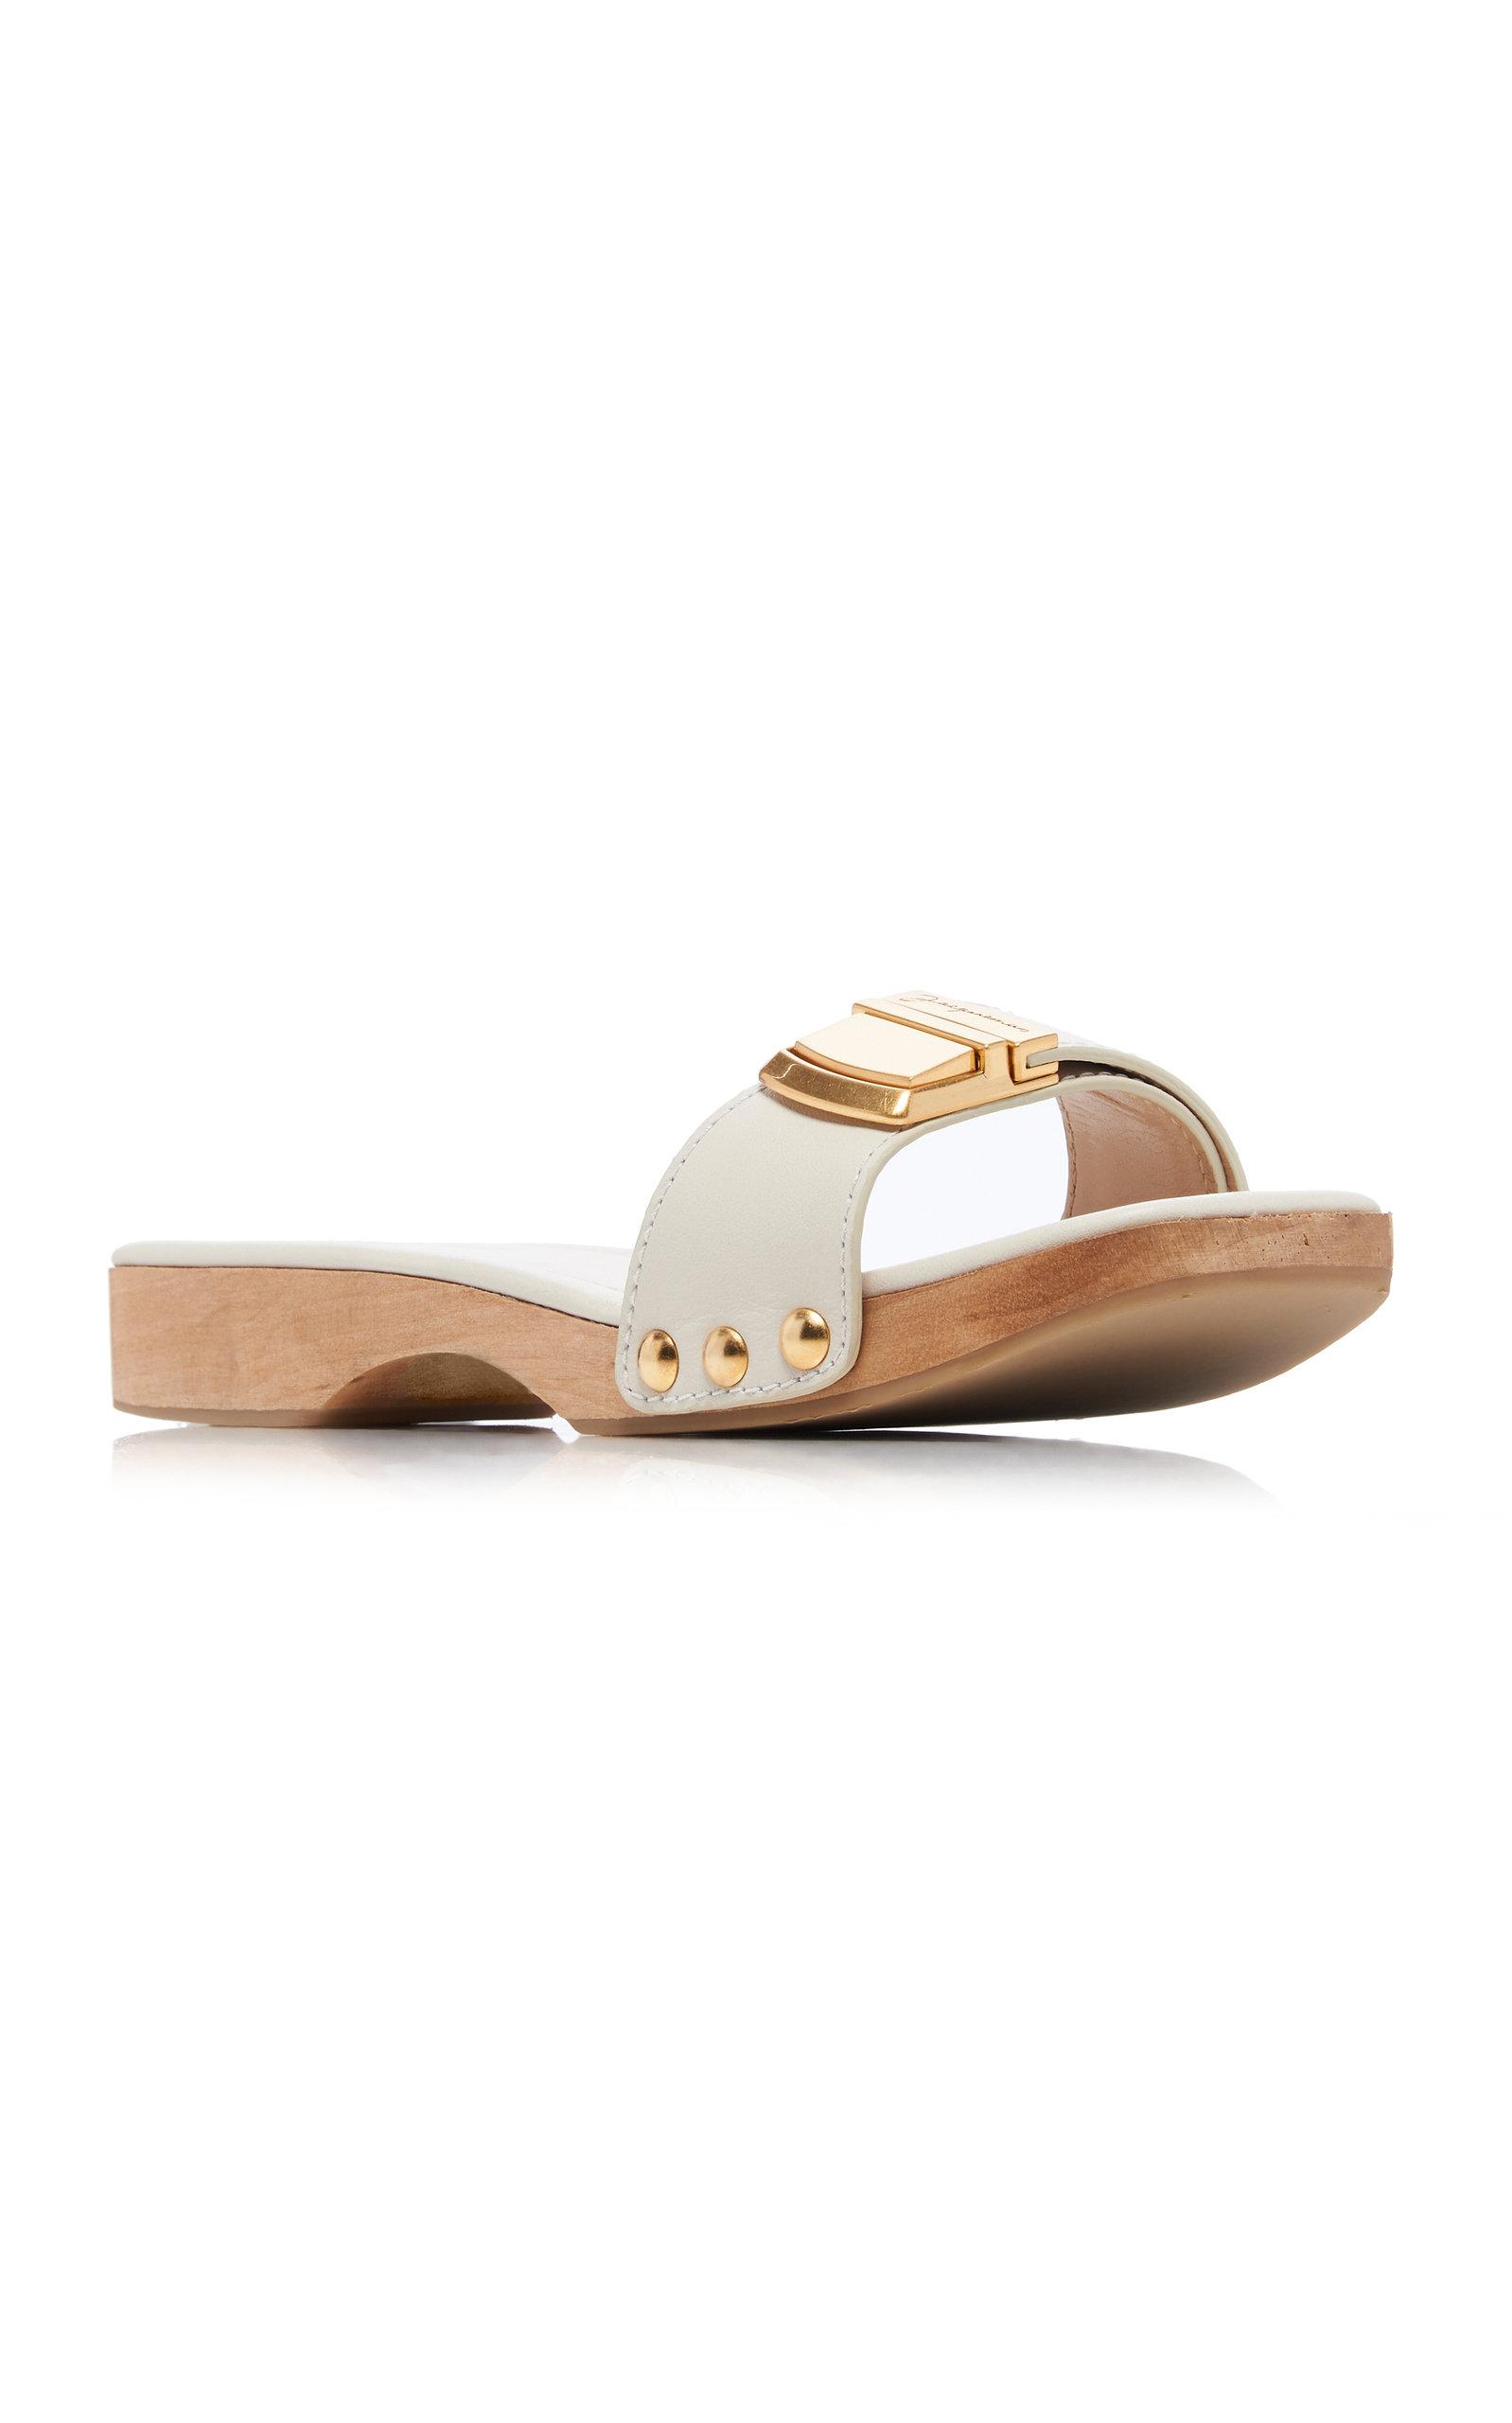 Jacquemus Les Tatanes Leather Slide Sandals in White | Lyst